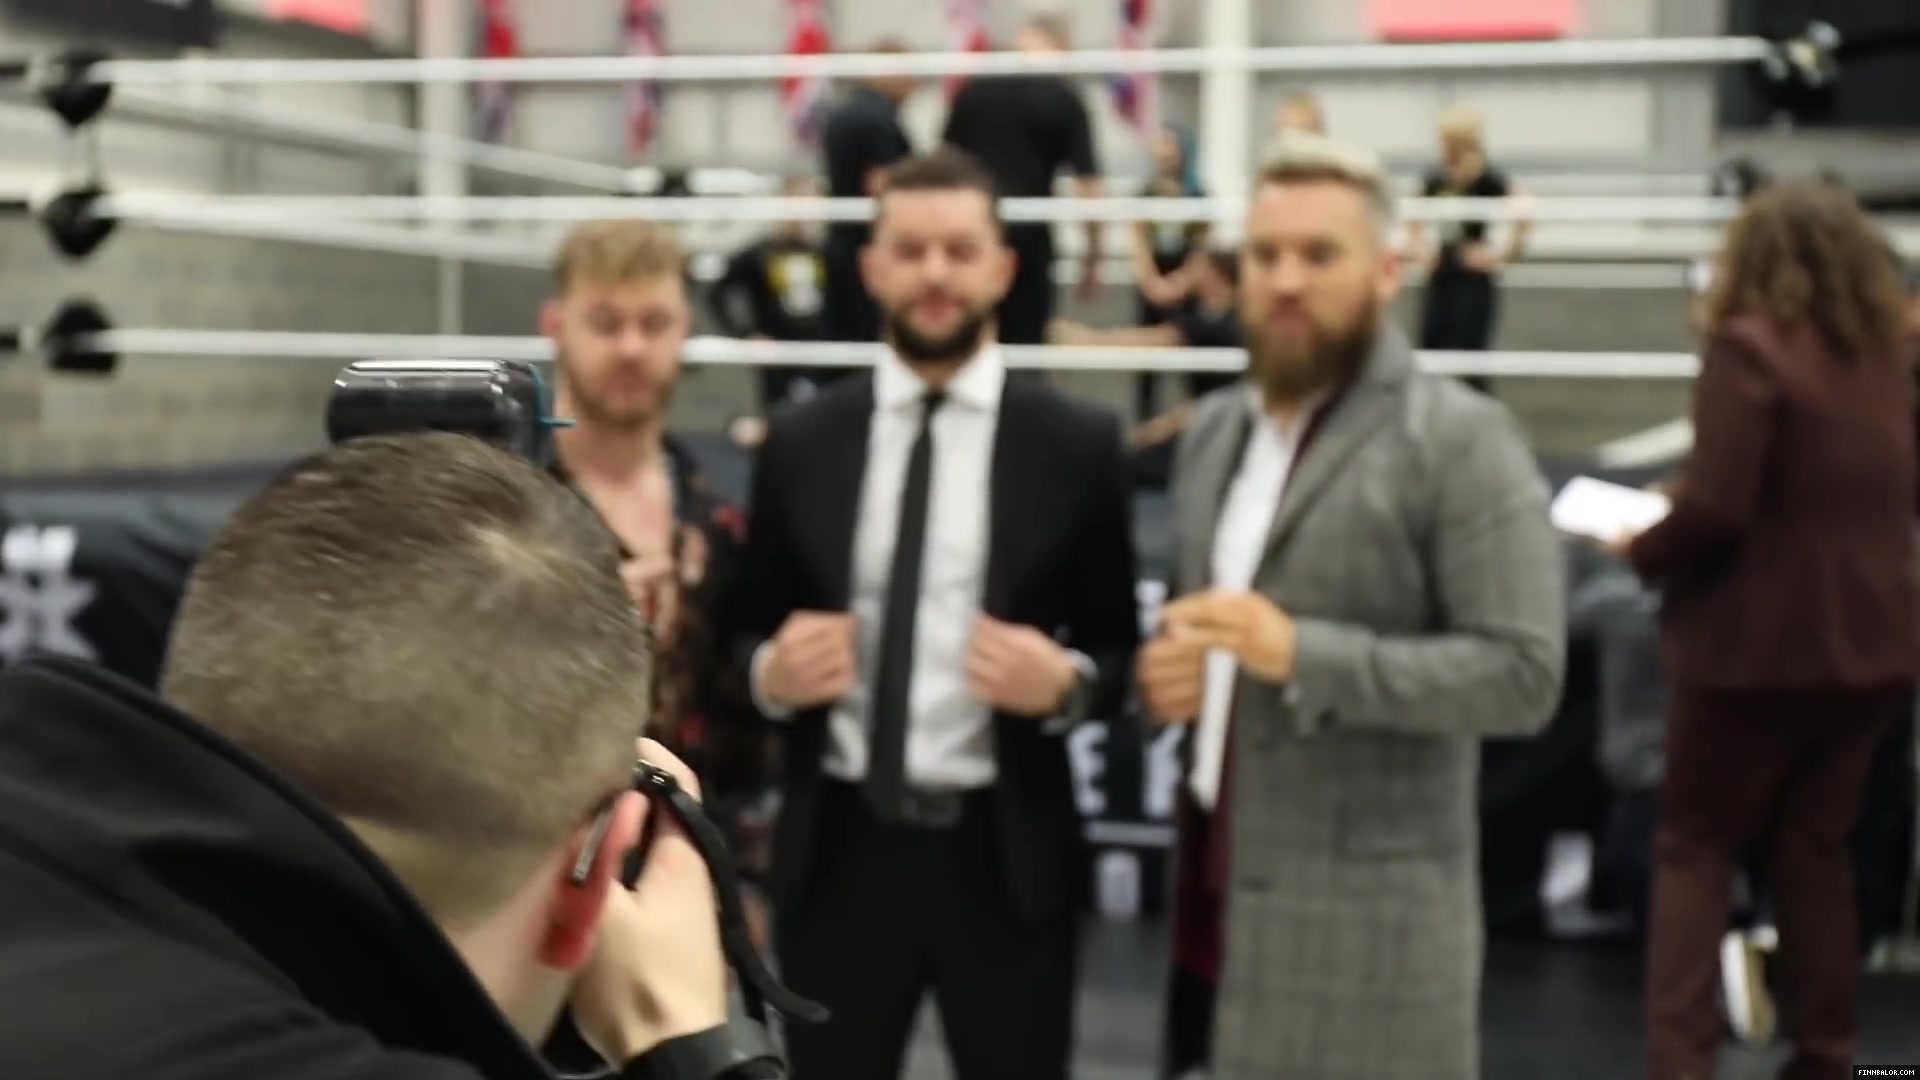 WWE_Superstar_FINN_BALOR_joins_MOUSTACHE_MOUNTAIN_at_the_opening_of_the_NXT_UK_PC_035.jpg